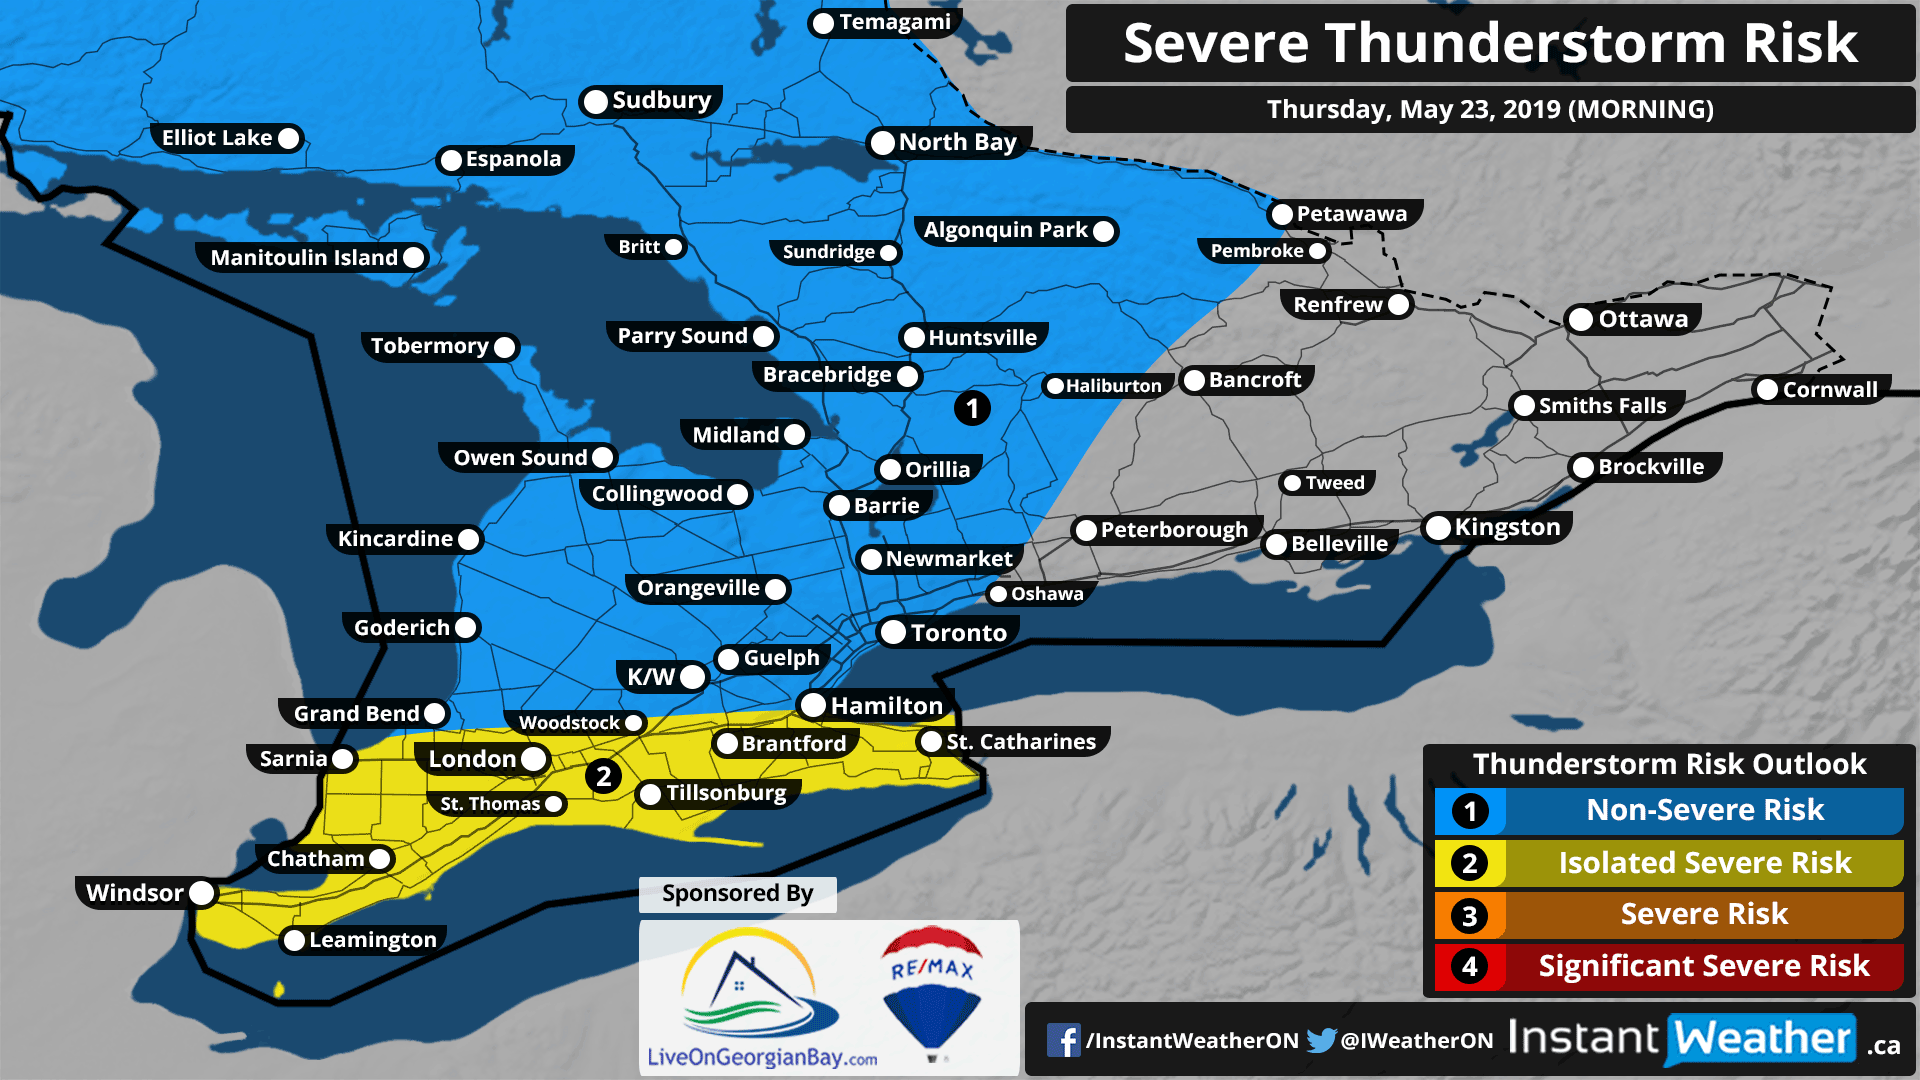 Threat of Severe Thunderstorms for Eastern Ontario on Thursday with